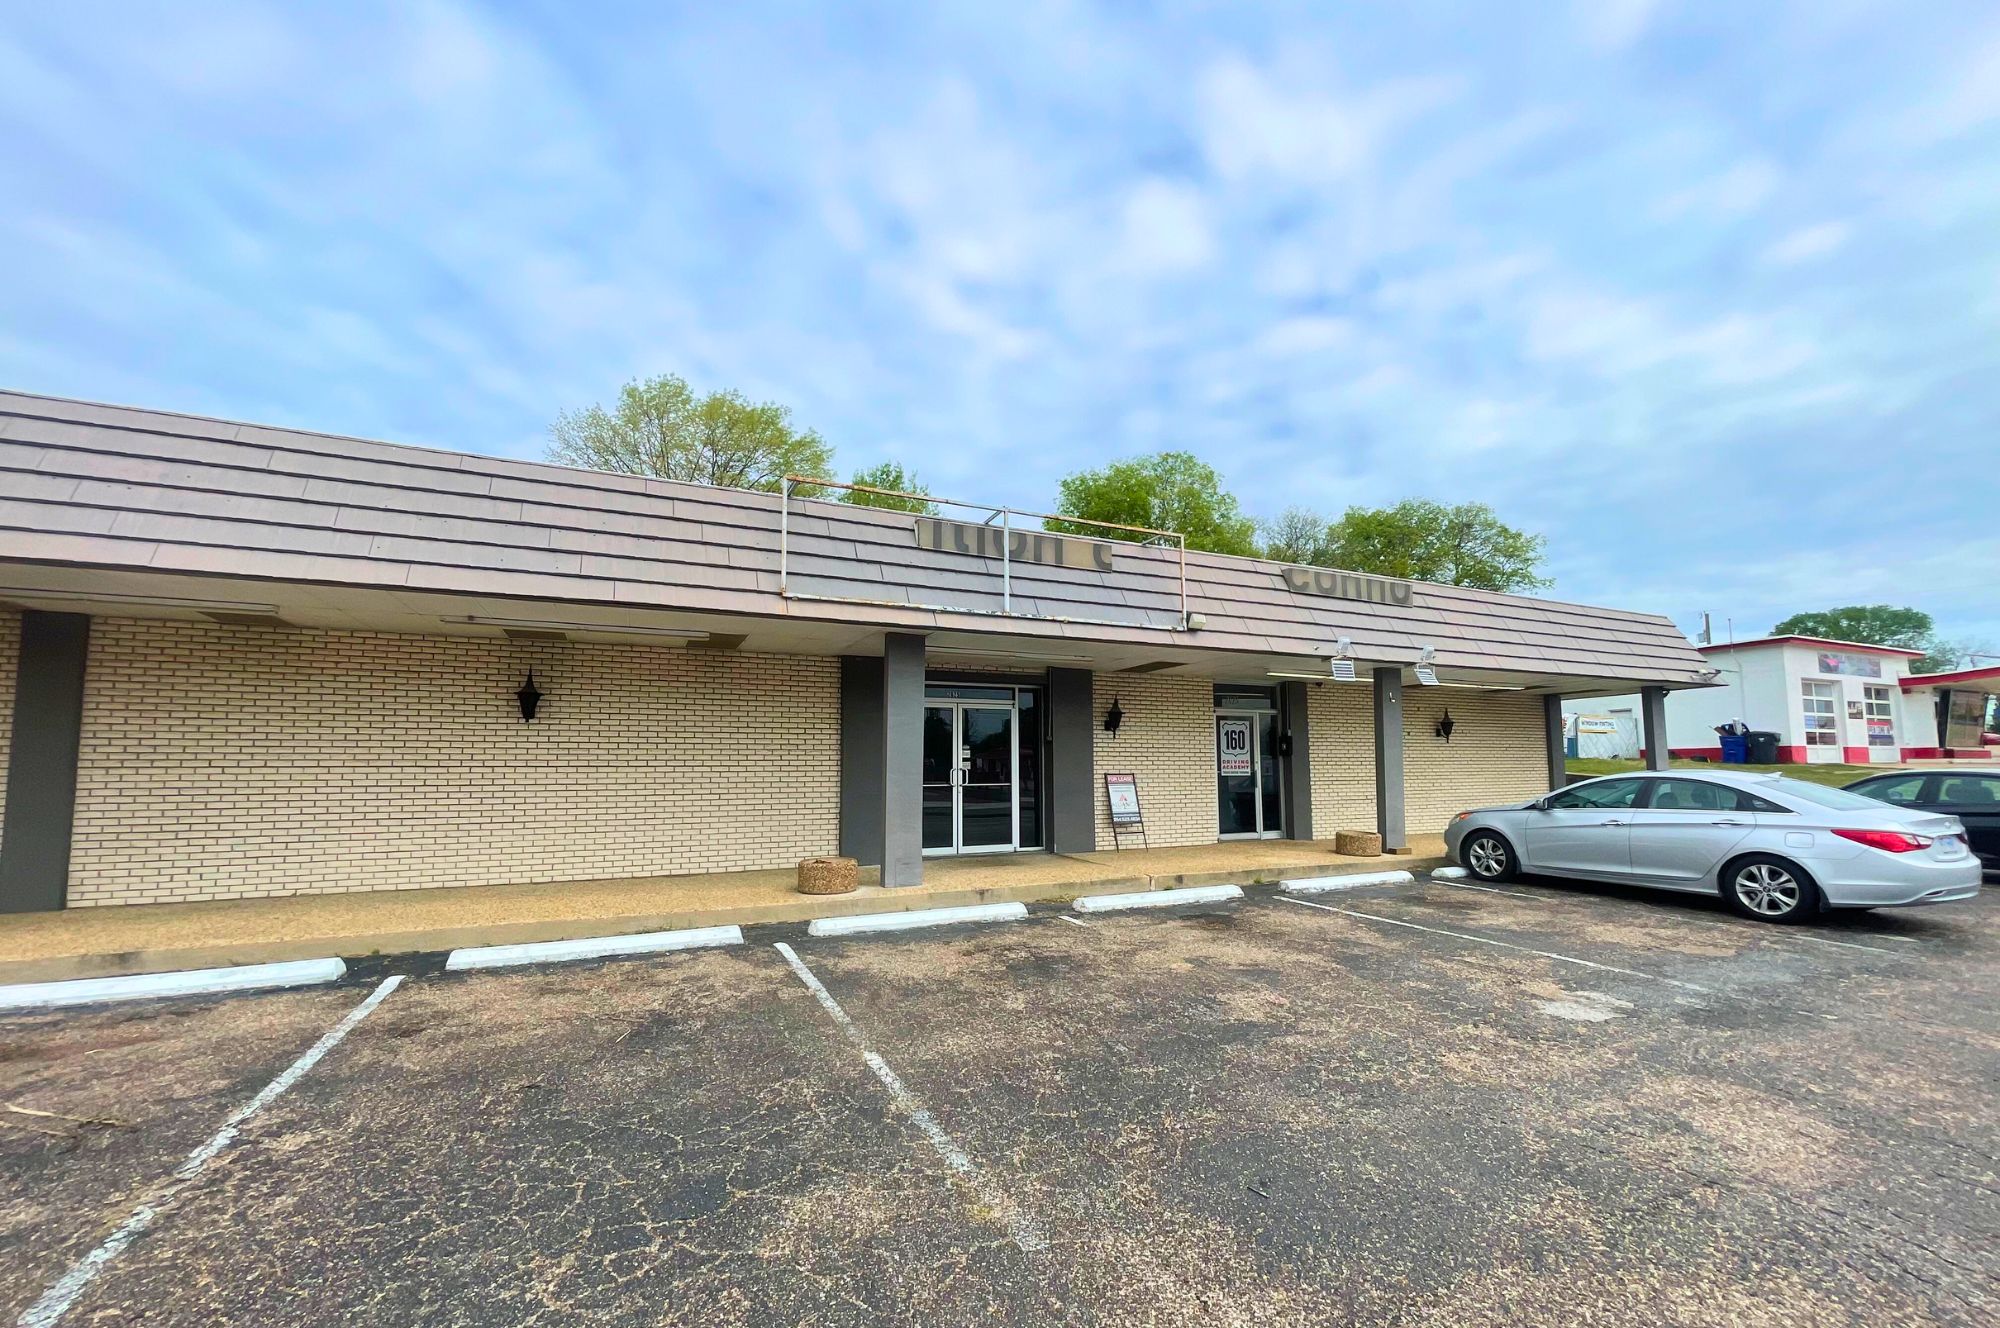 2500 SF Retail Space for Lease in West Waco Drive